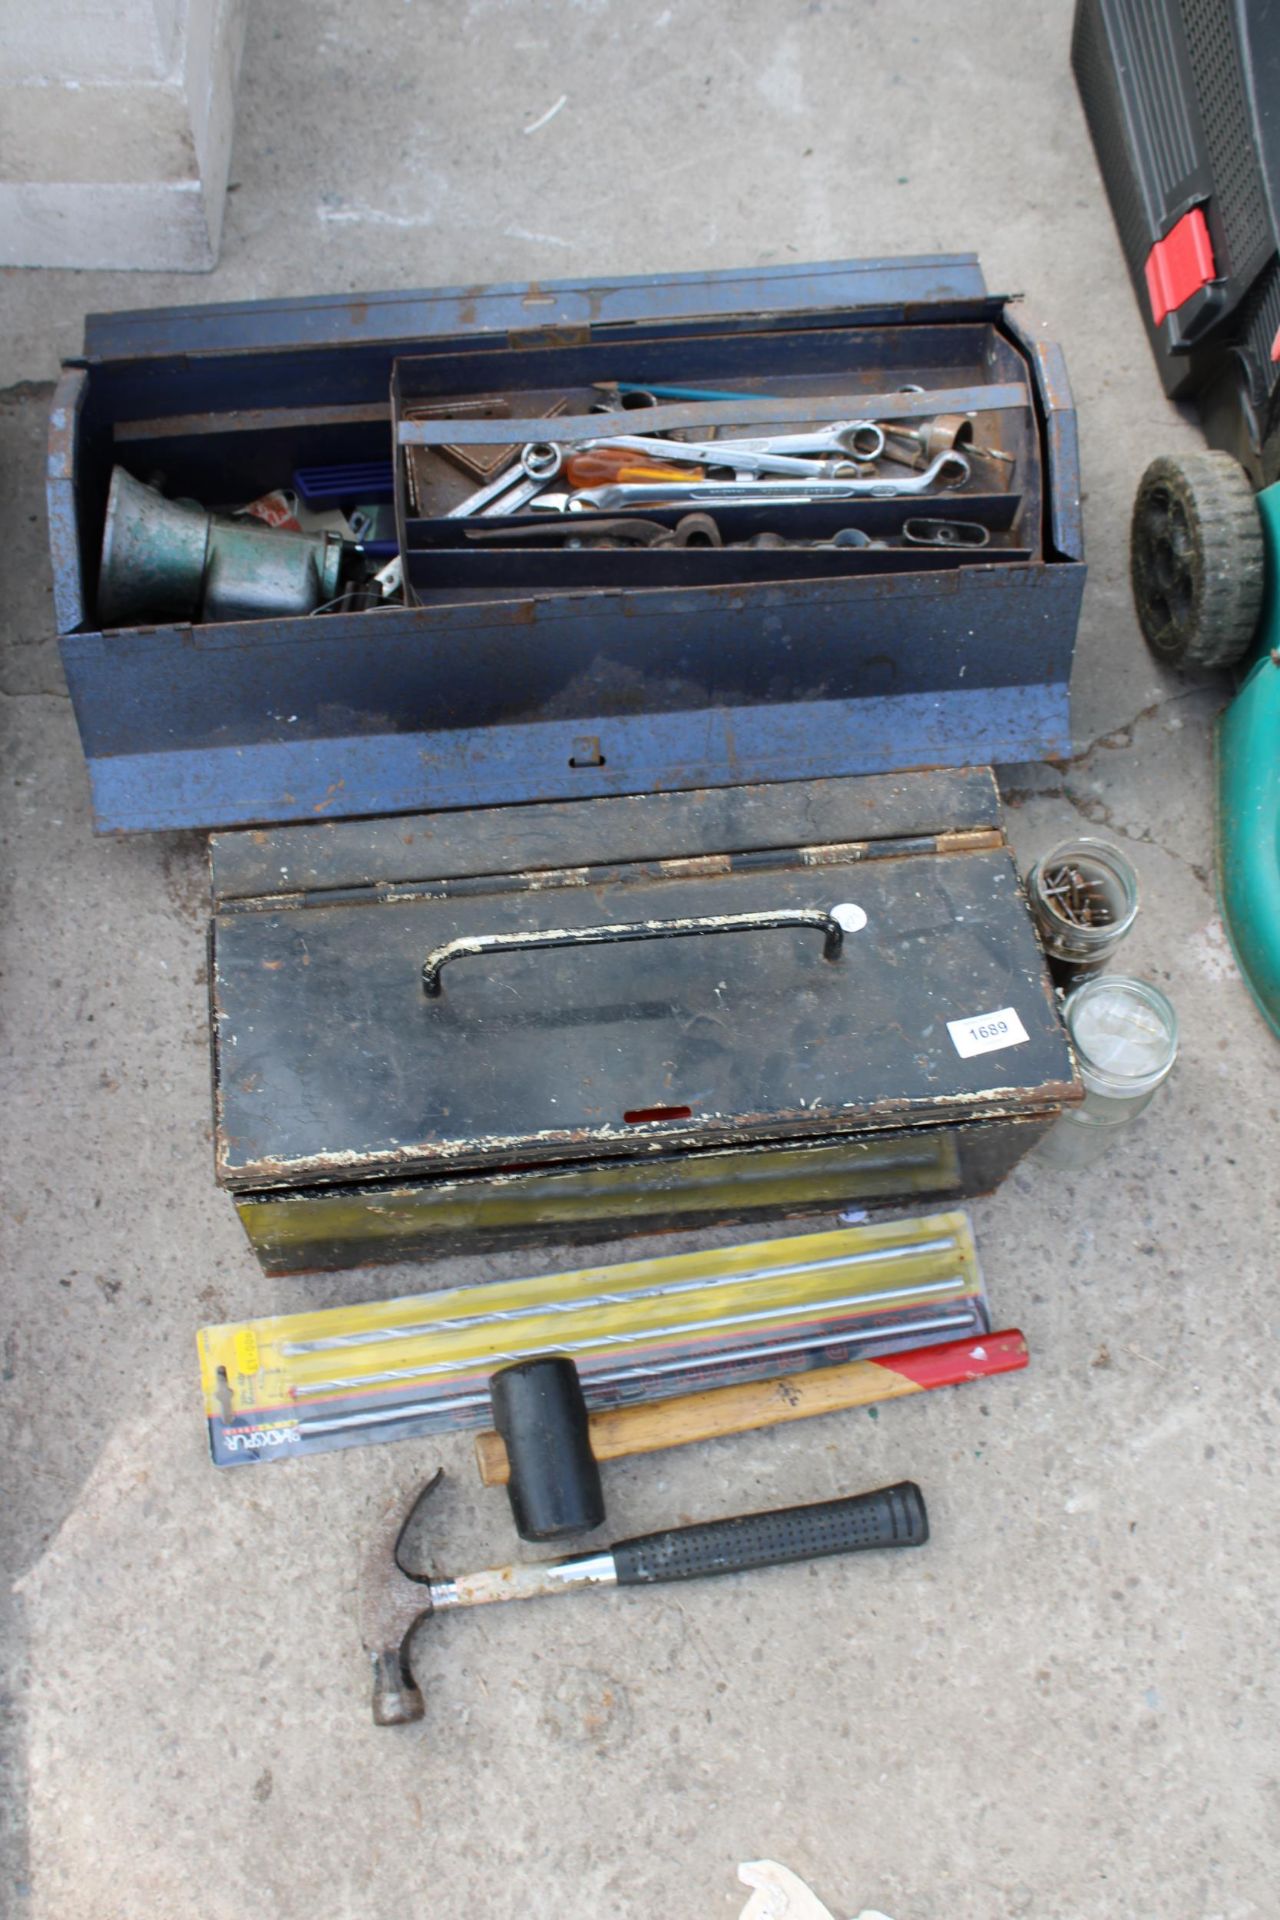 TWO METAL TOOL BOXES WITH AN ASSORTMENT OF TOOLS TO INCLUDE HAMMERS, SPANNERS AND DRILL BITS ETC